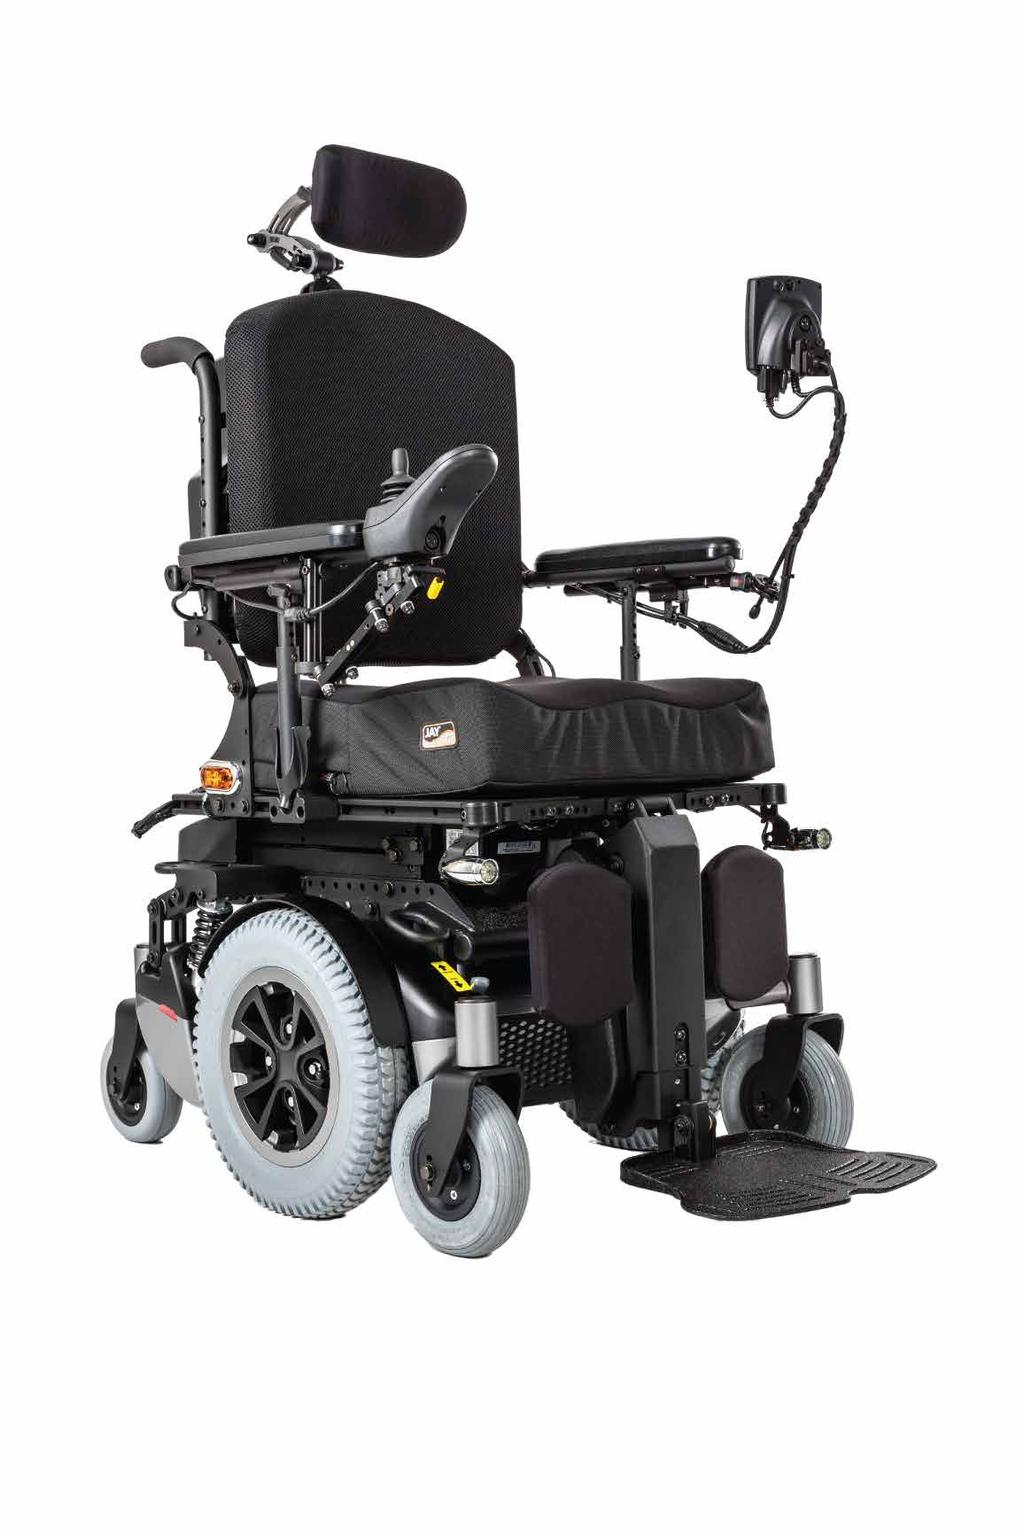 TM MID-WHEEL Recline Tilt New Shroud The Quickie Xperience 2 is a mid-wheel drive power wheelchair offering excellent stability for better comfort.